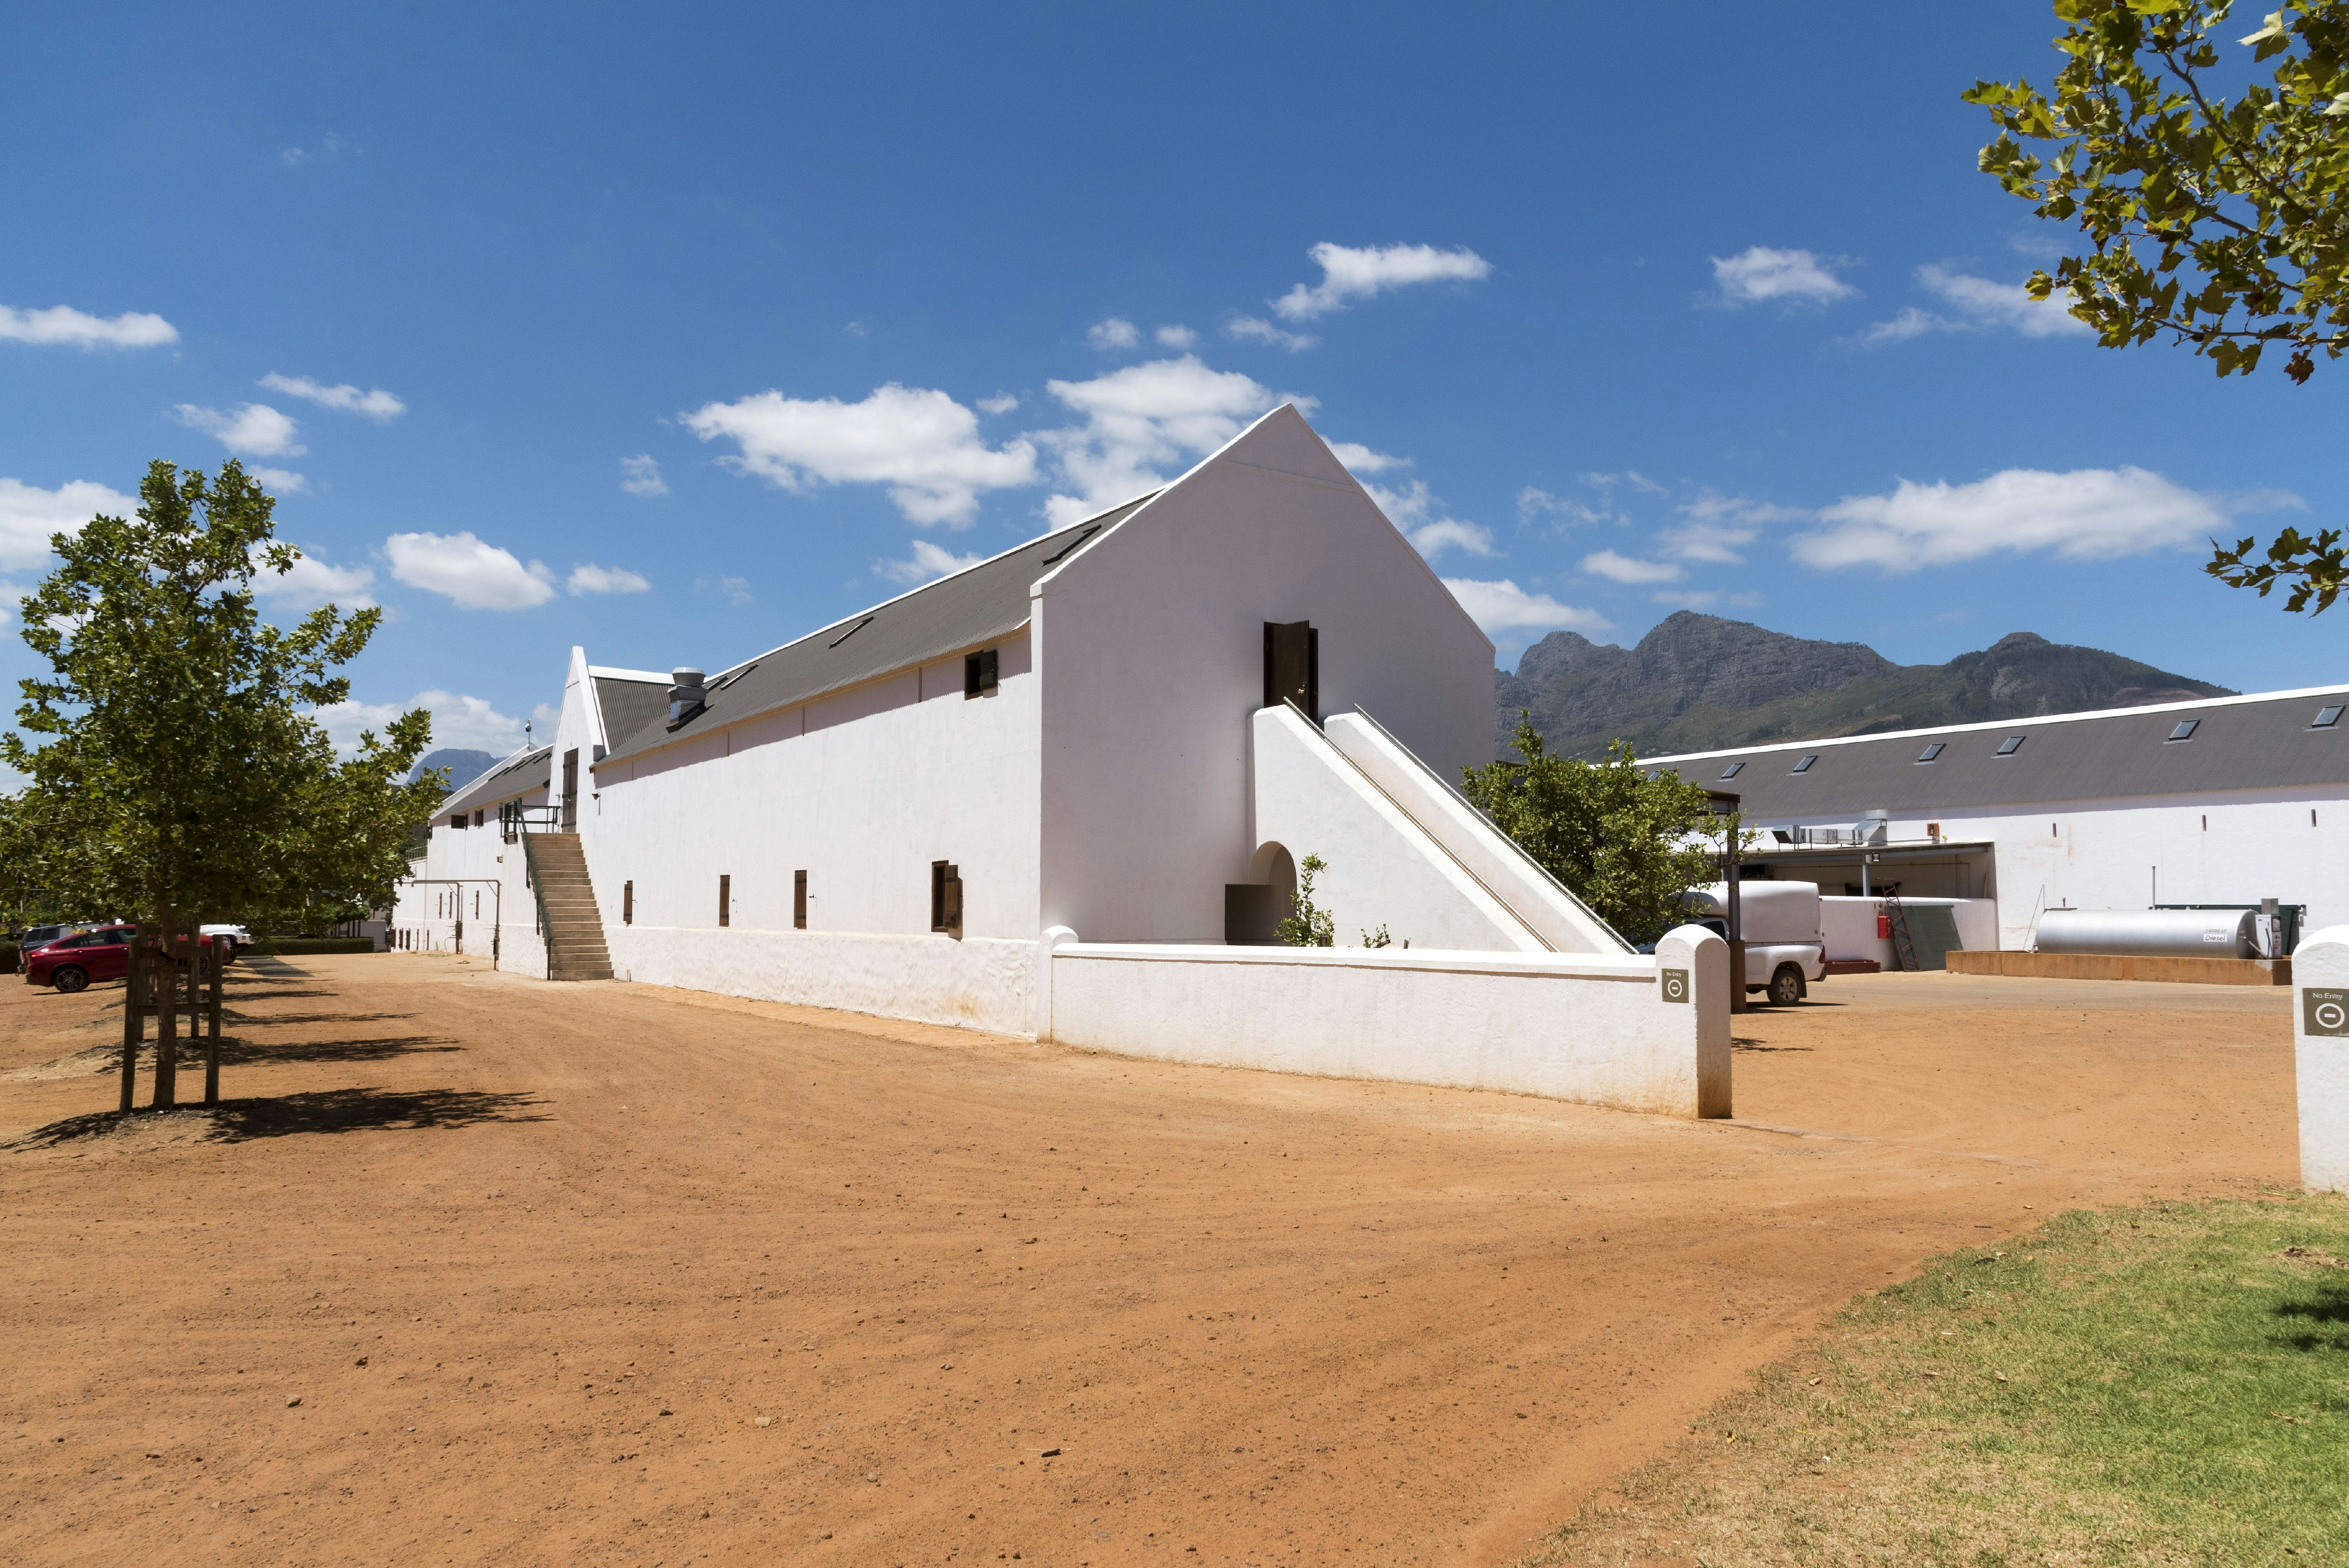 A white adobe building at Babylonstoren situated on a red dirt road with a small tree in the foreground and green hills in the background